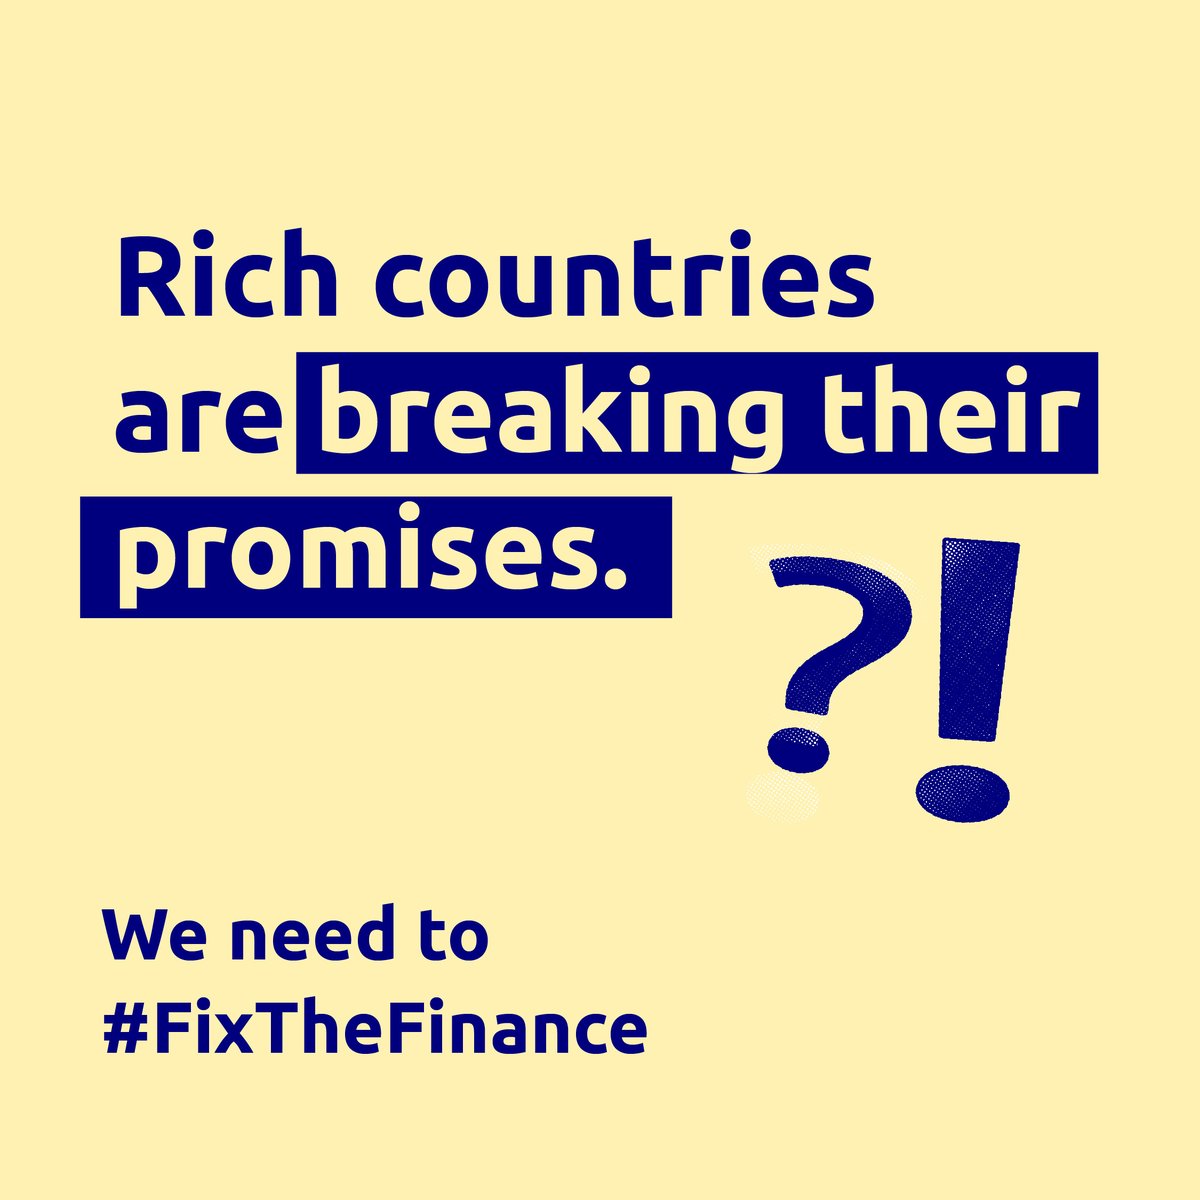 Wealthy countries have broken their promises to provide the #climatefinance necessary to help frontline communities adapt to impacts and transition to greener pathways, and put the planet on a path to safety.

#FixTheFinance #Decarbonize #Decolonize #ClimateFinance…